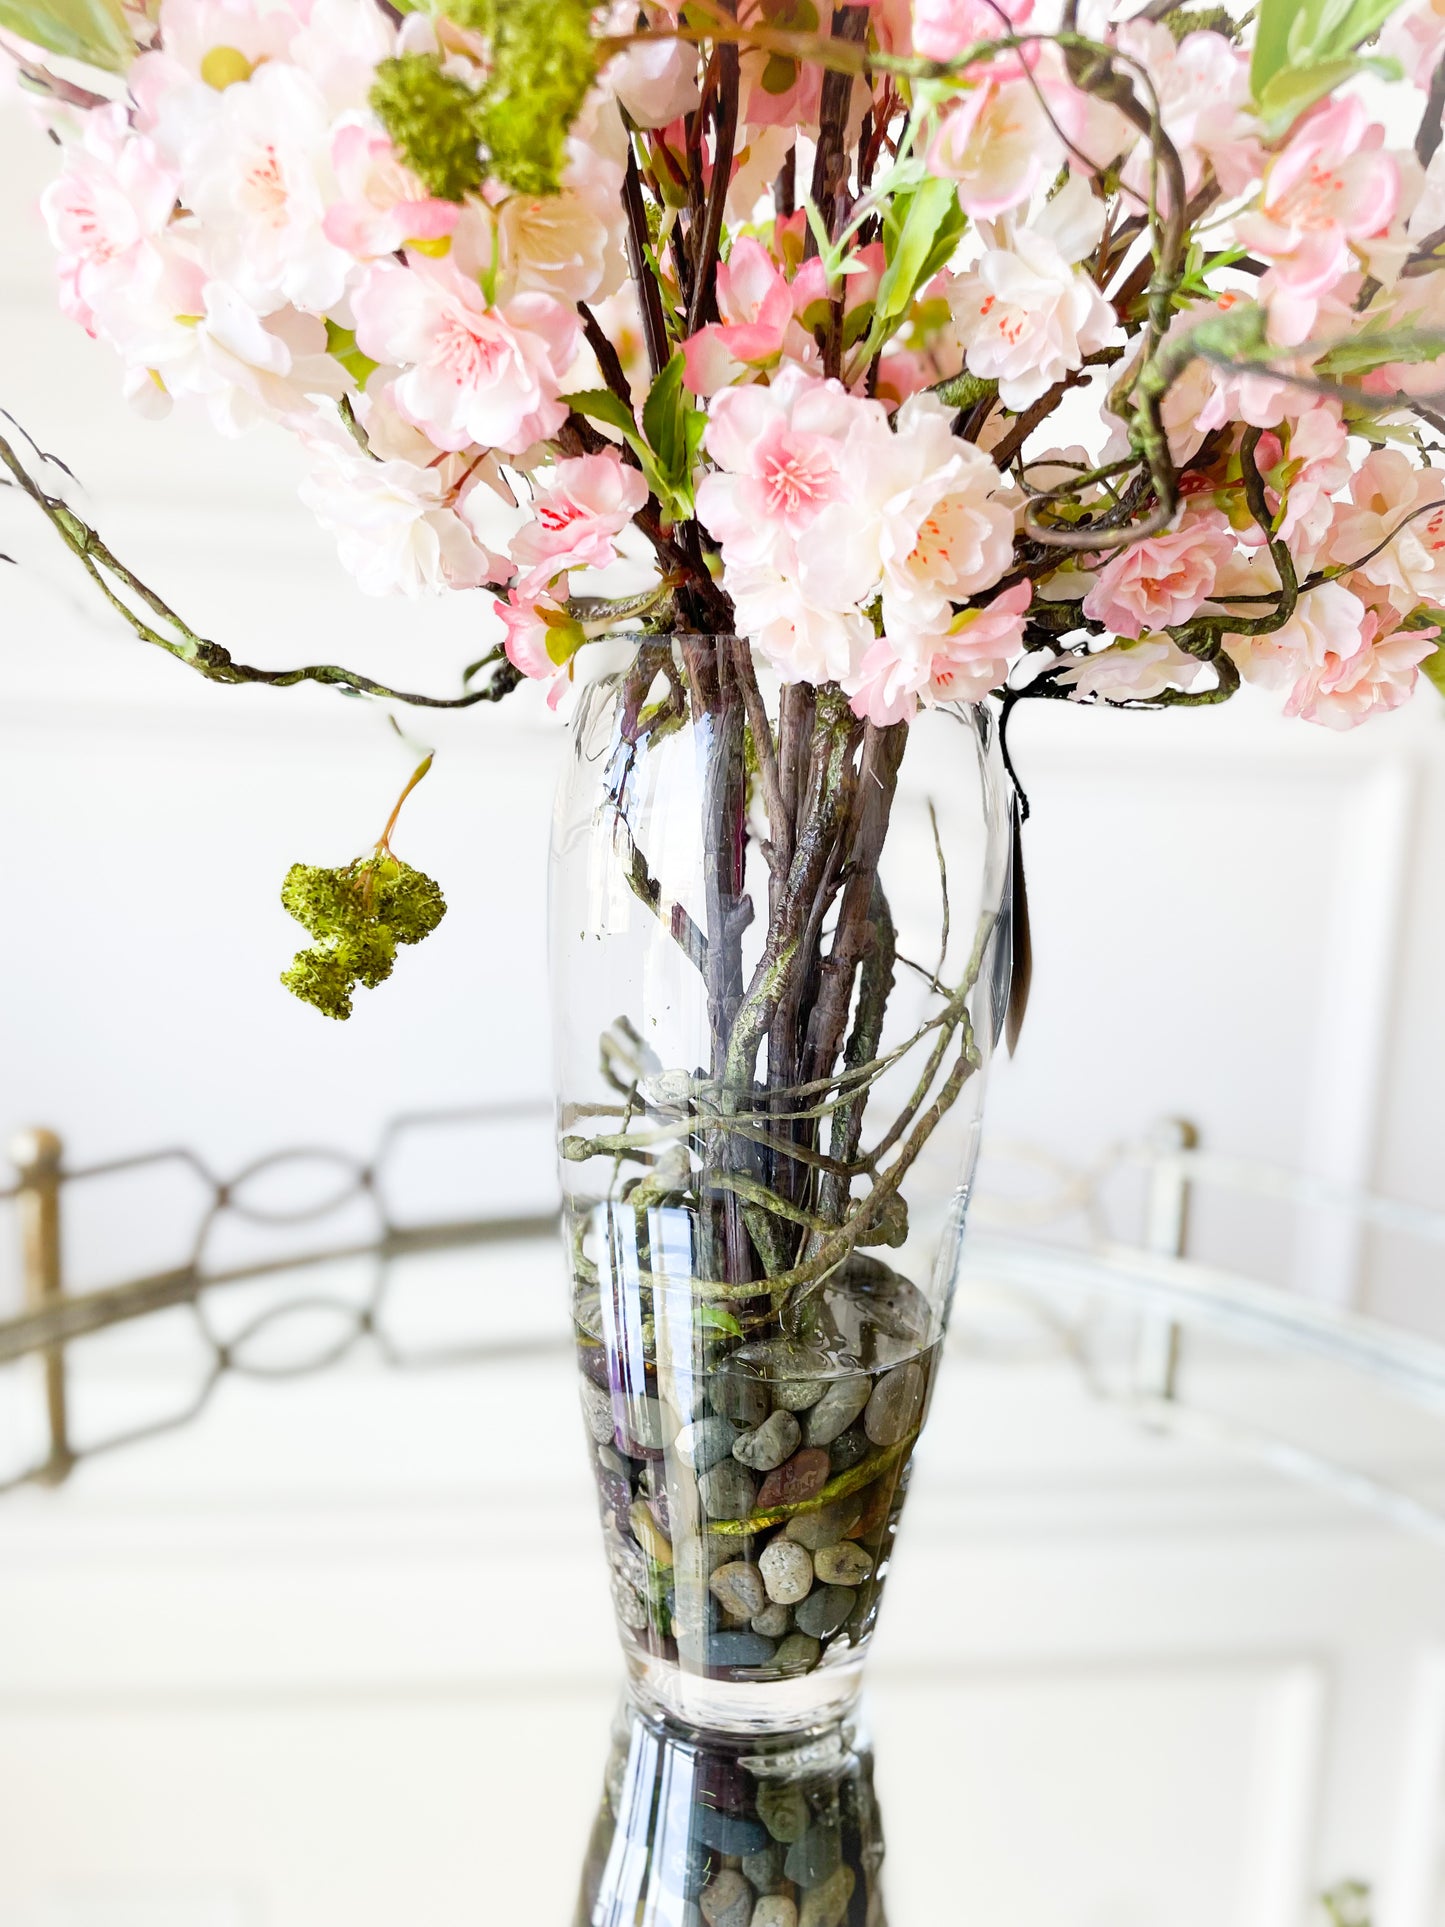 Pink Cherry Blossom Stems In Glass Vase